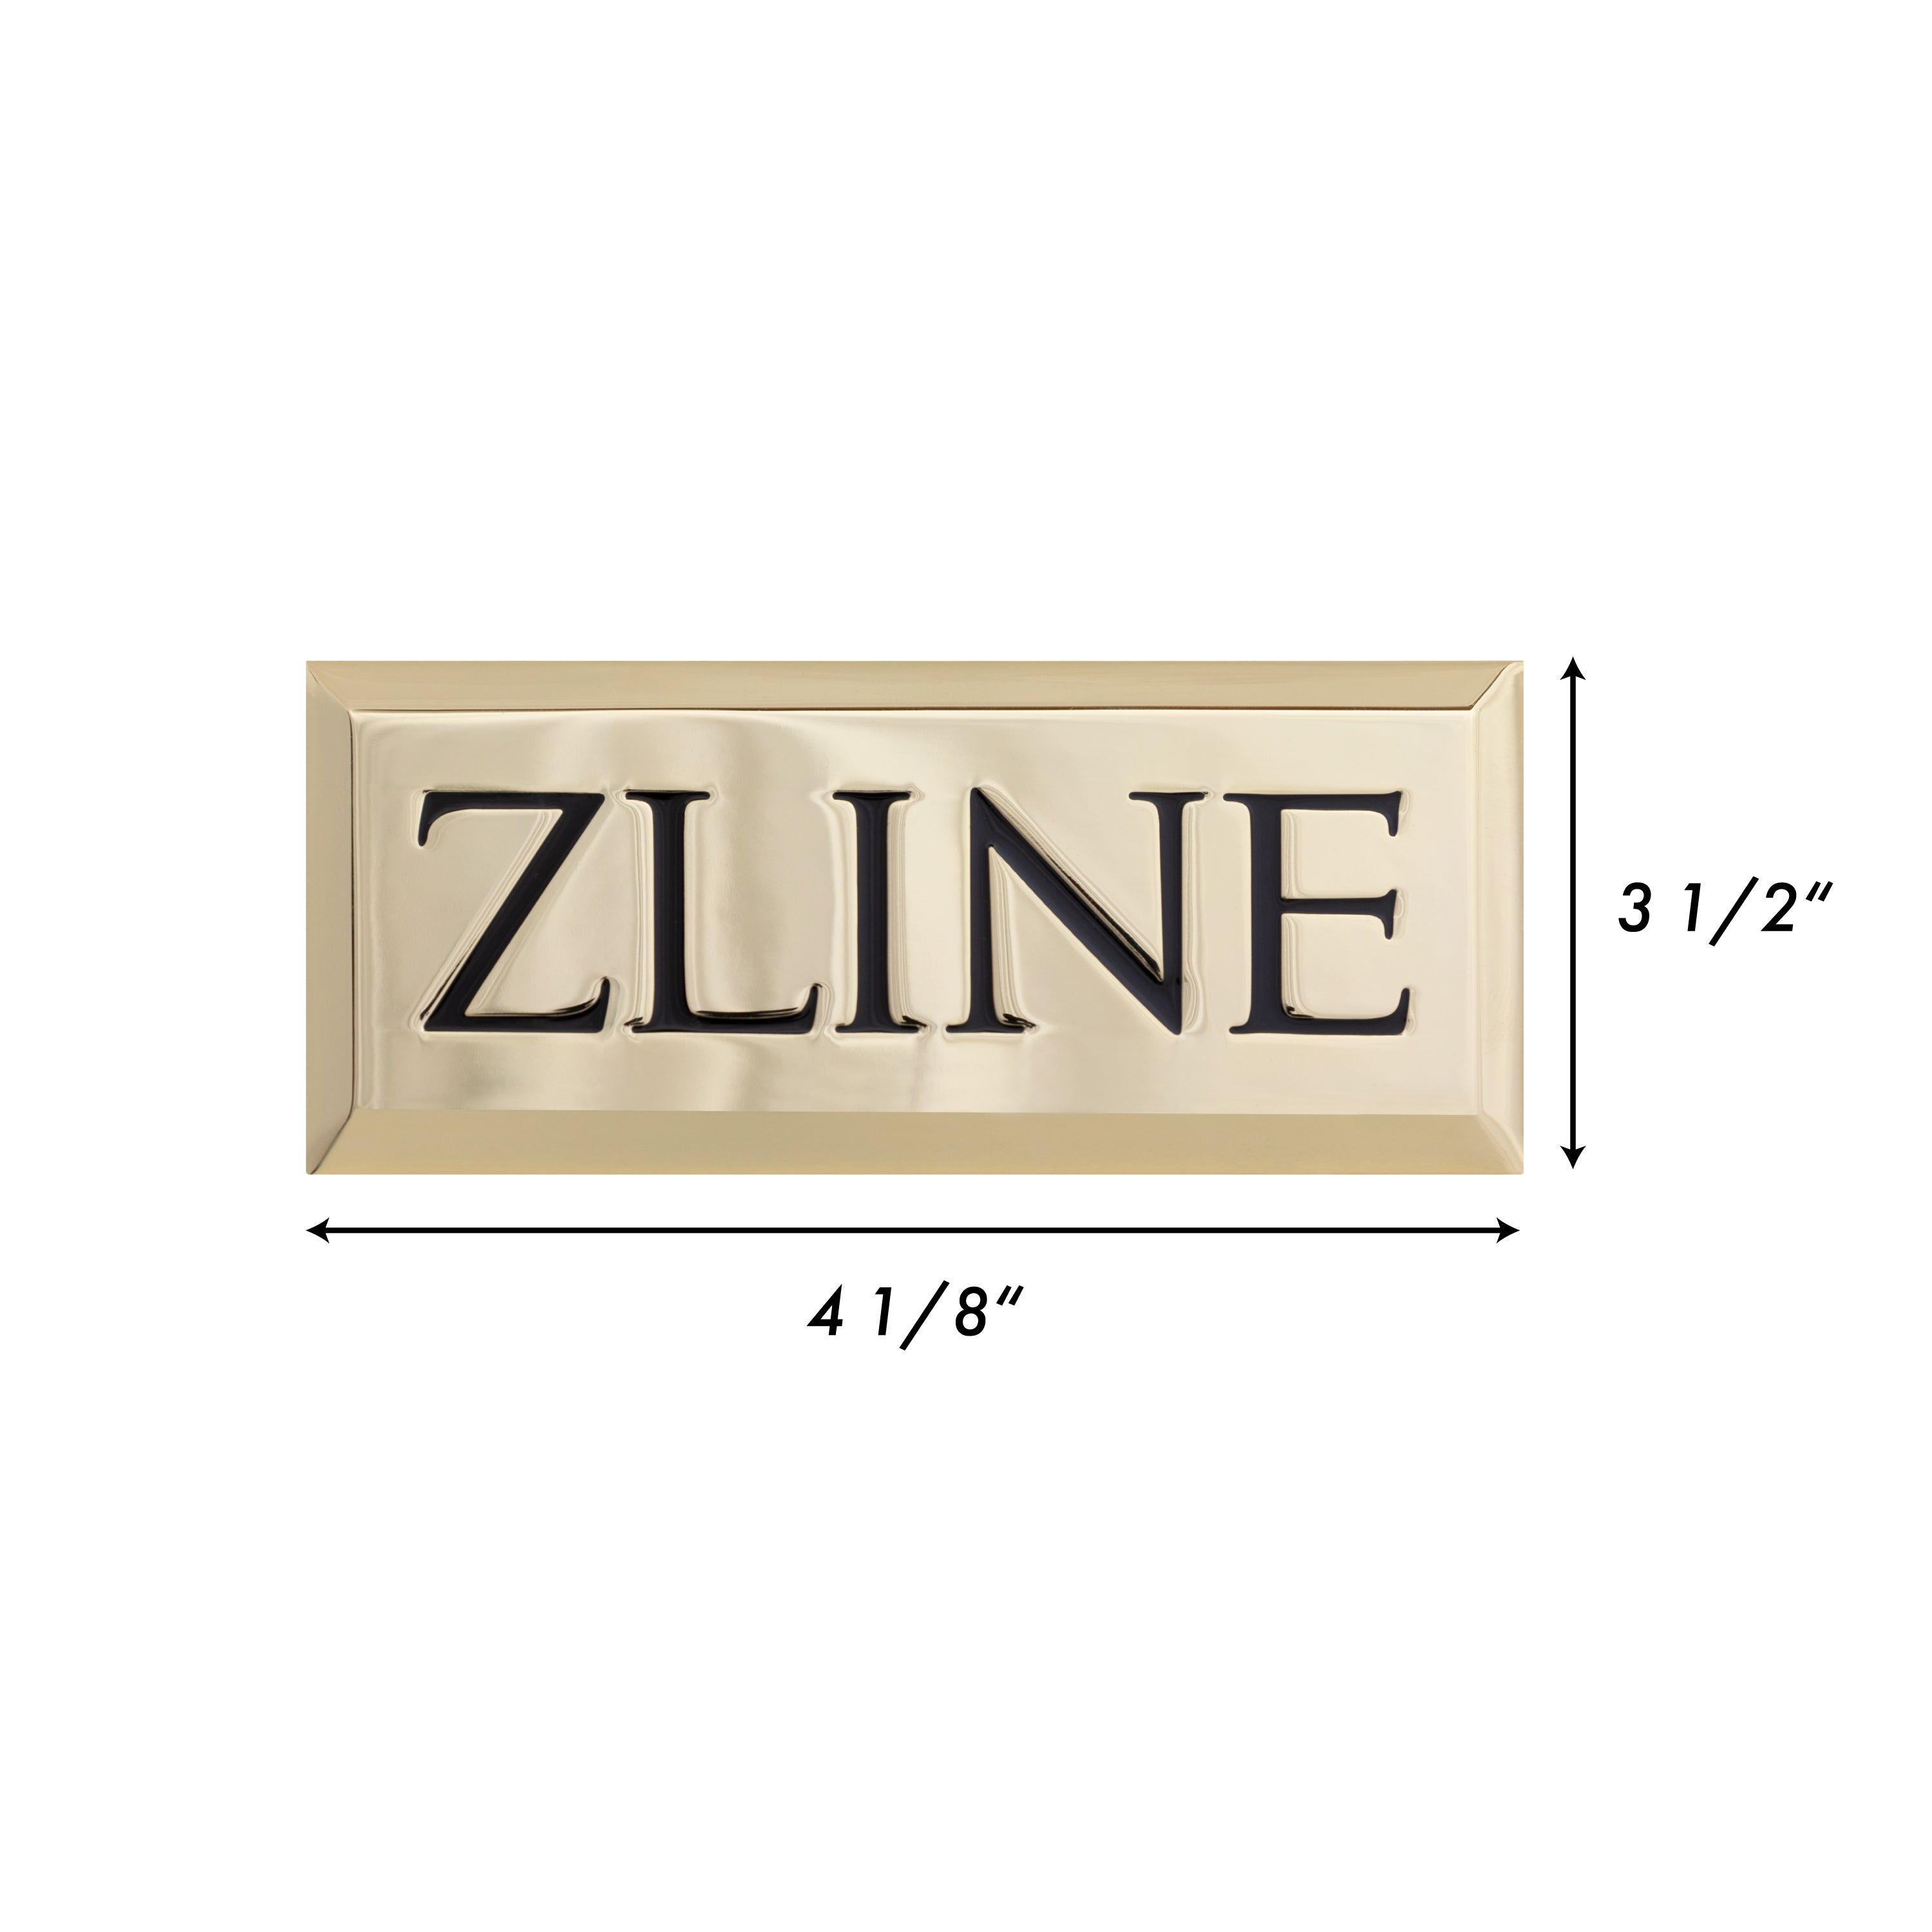 ZLINE Autograph Edition Badge Sample in Gold